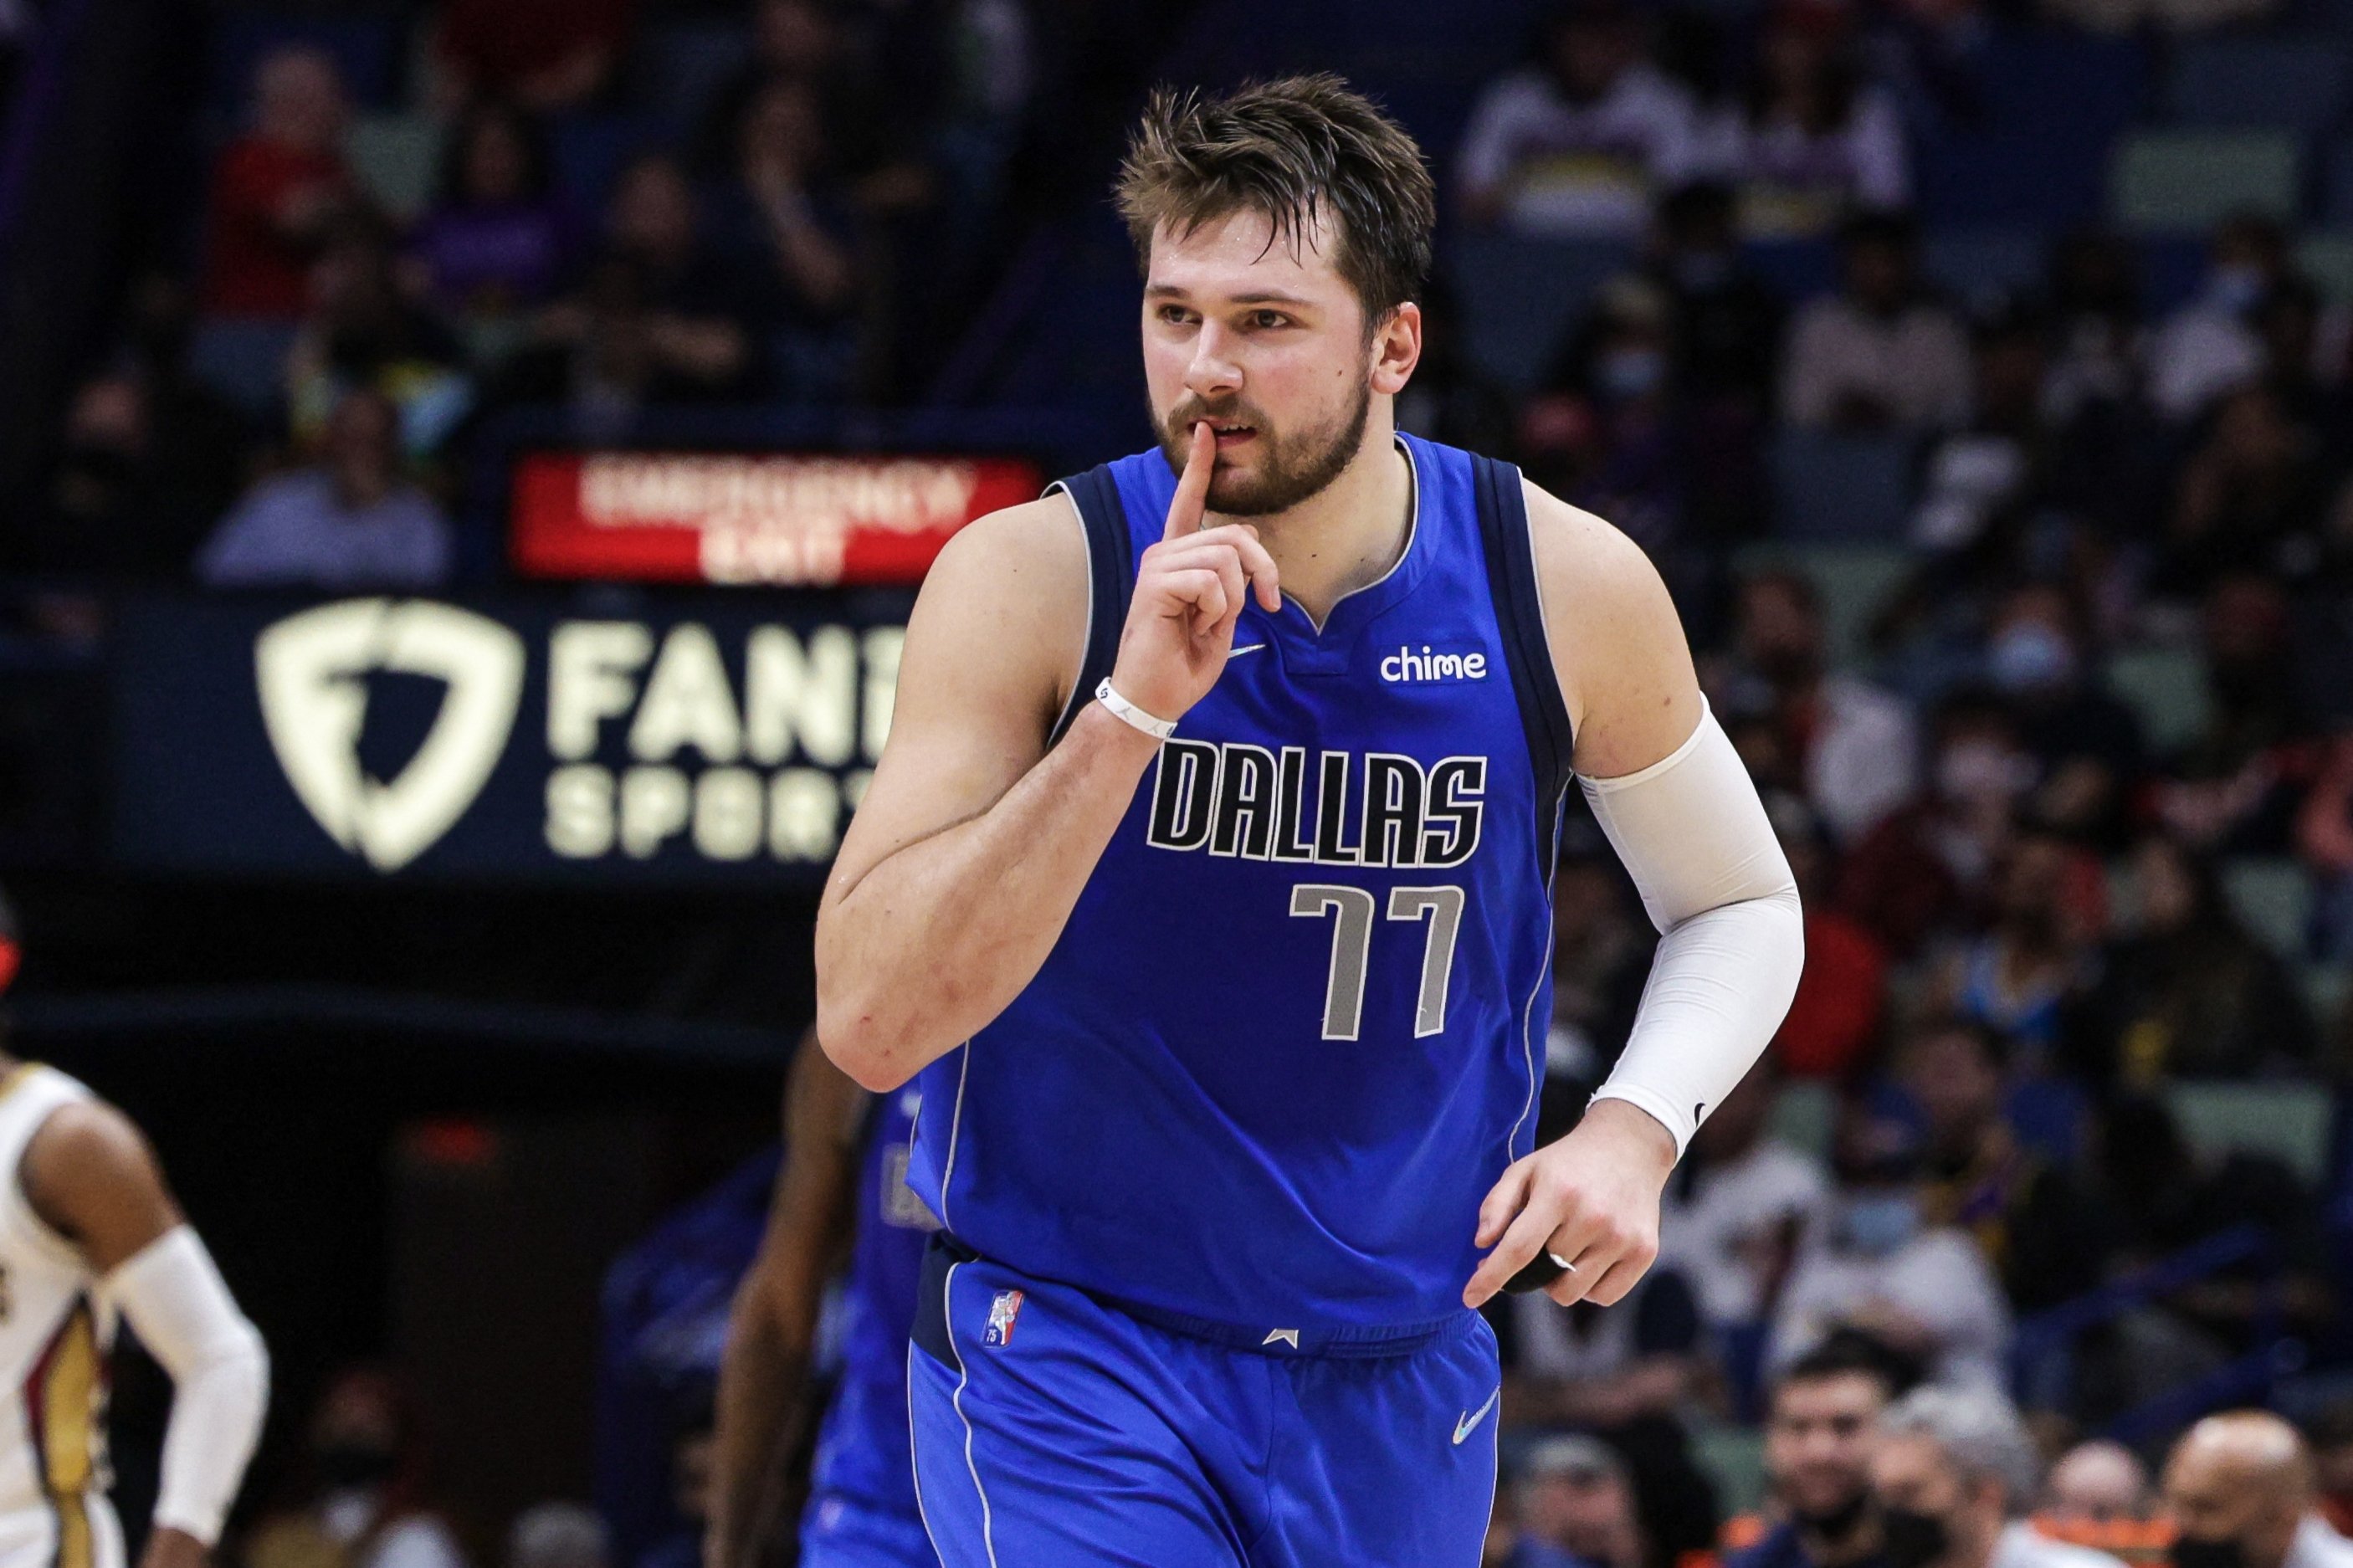 Dallas Mavericks guard Luka Doncic reacts during an NBA game against the New Orleans Pelicans, New Orleans, Louisiana, U.S., Feb. 17, 2022.